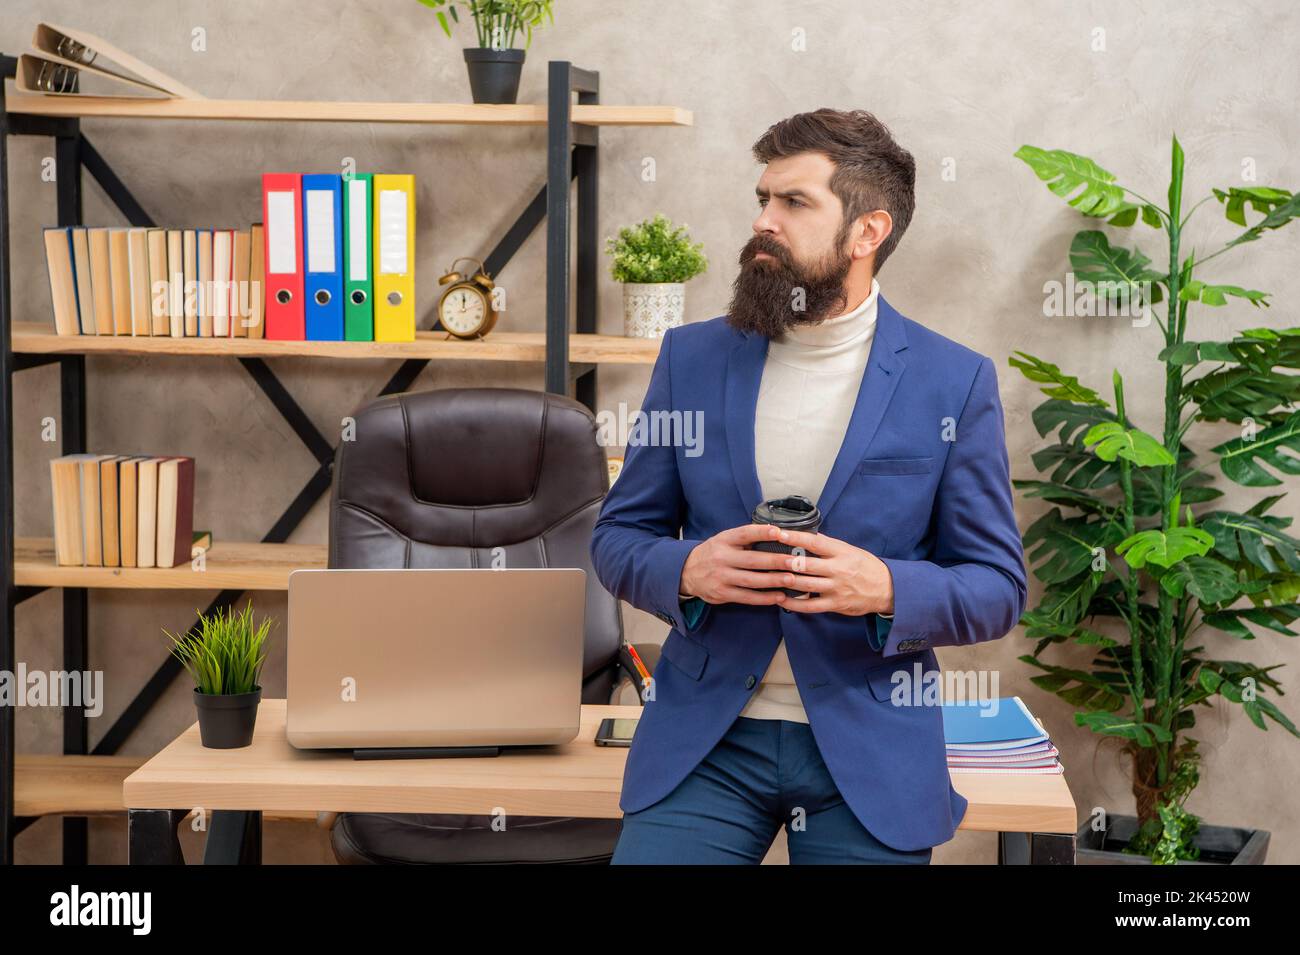 Thoughtful businessman taking coffee break during office work, thinking Stock Photo